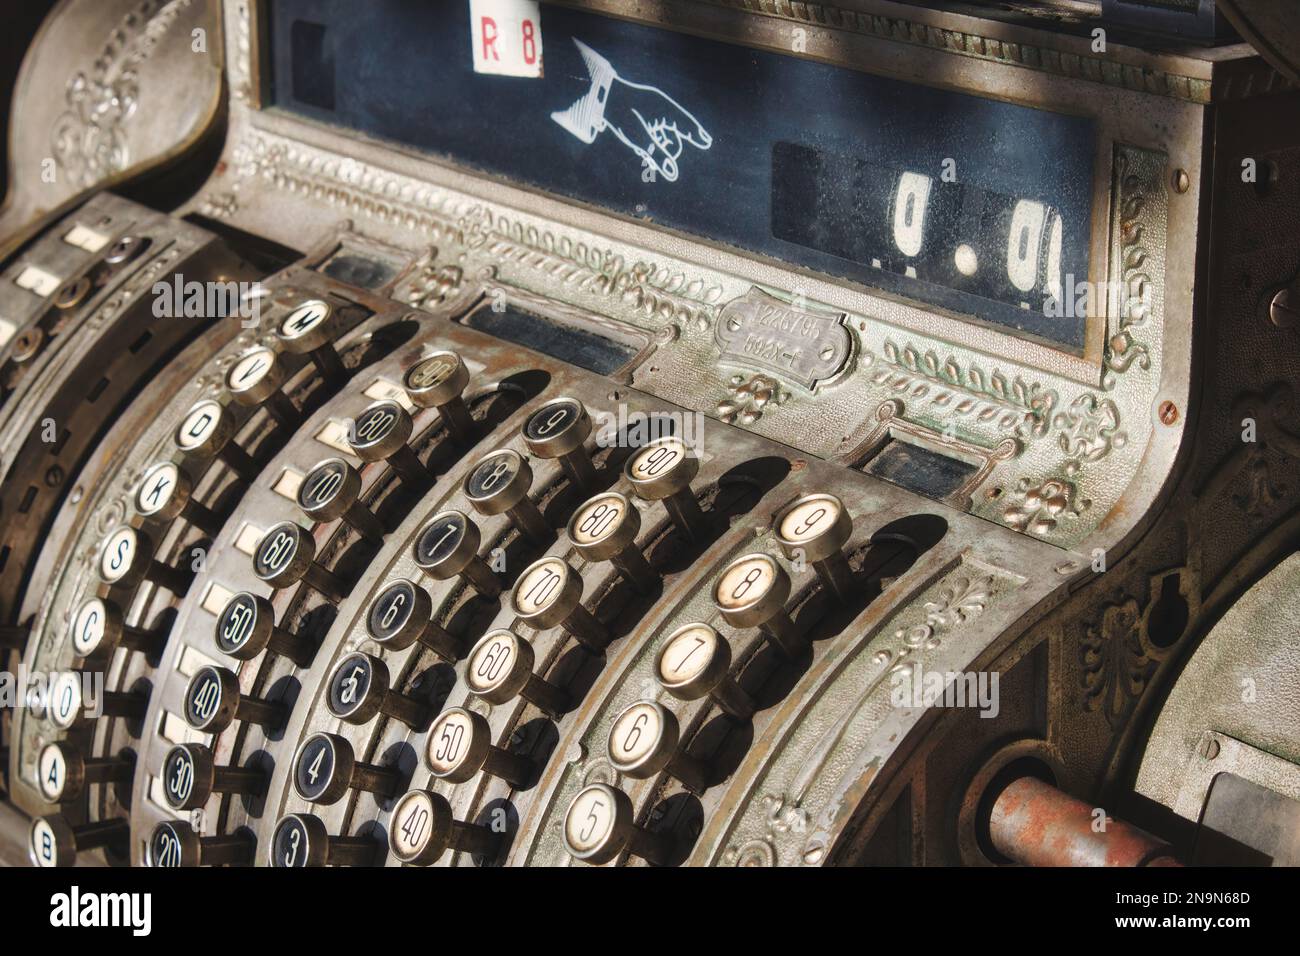 Close-up of an old antique metallic commercial cash register Stock Photo